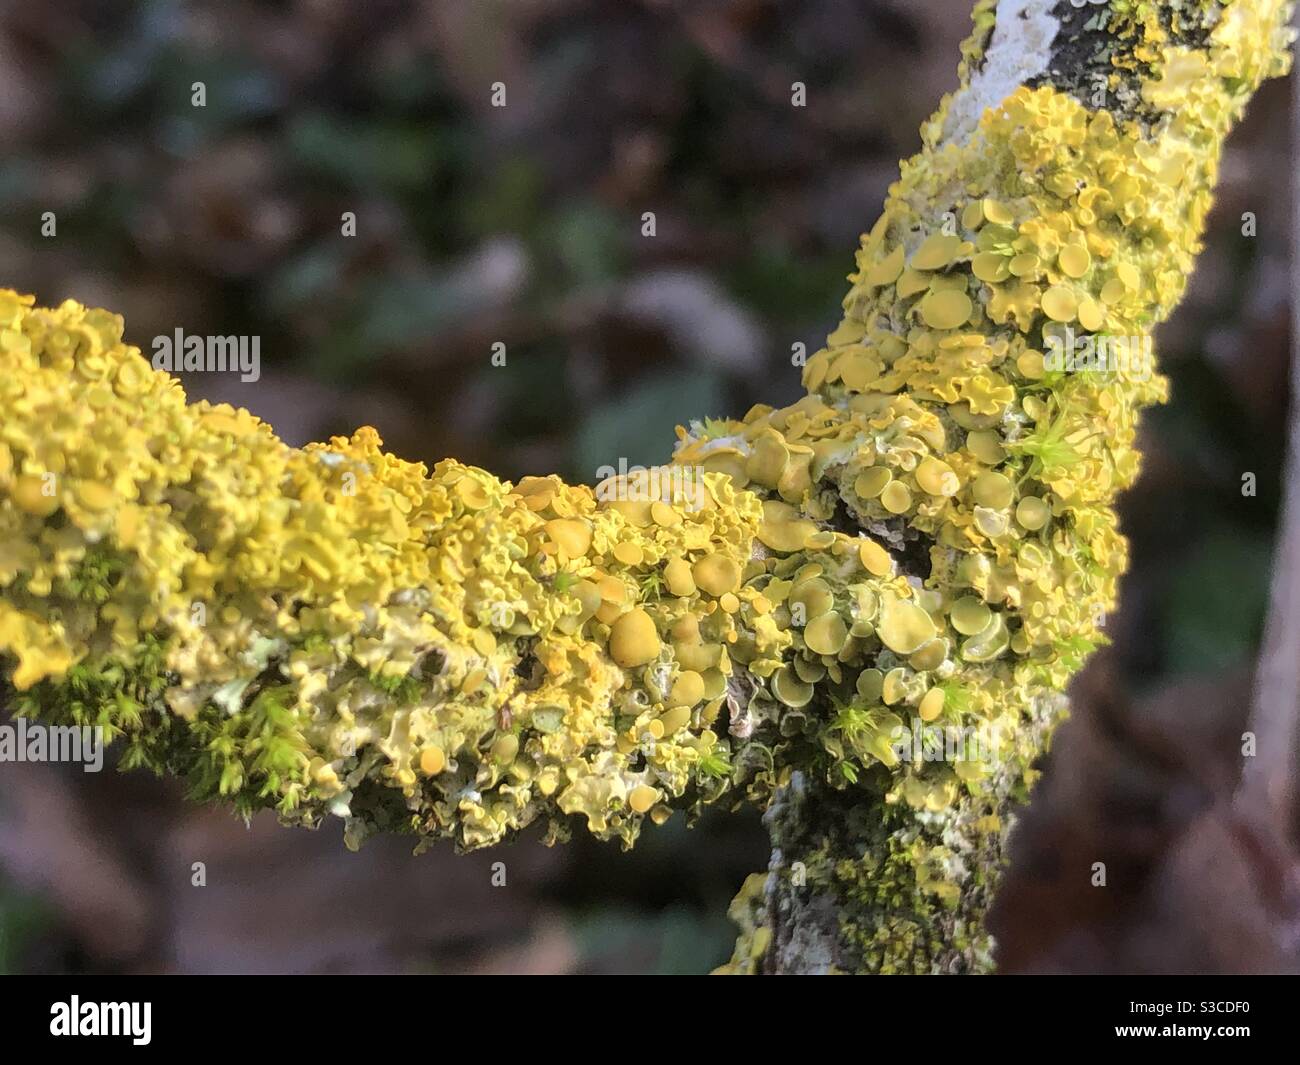 Bend in a branch smothered in fluorescent yellow and green lichen fungus Stock Photo